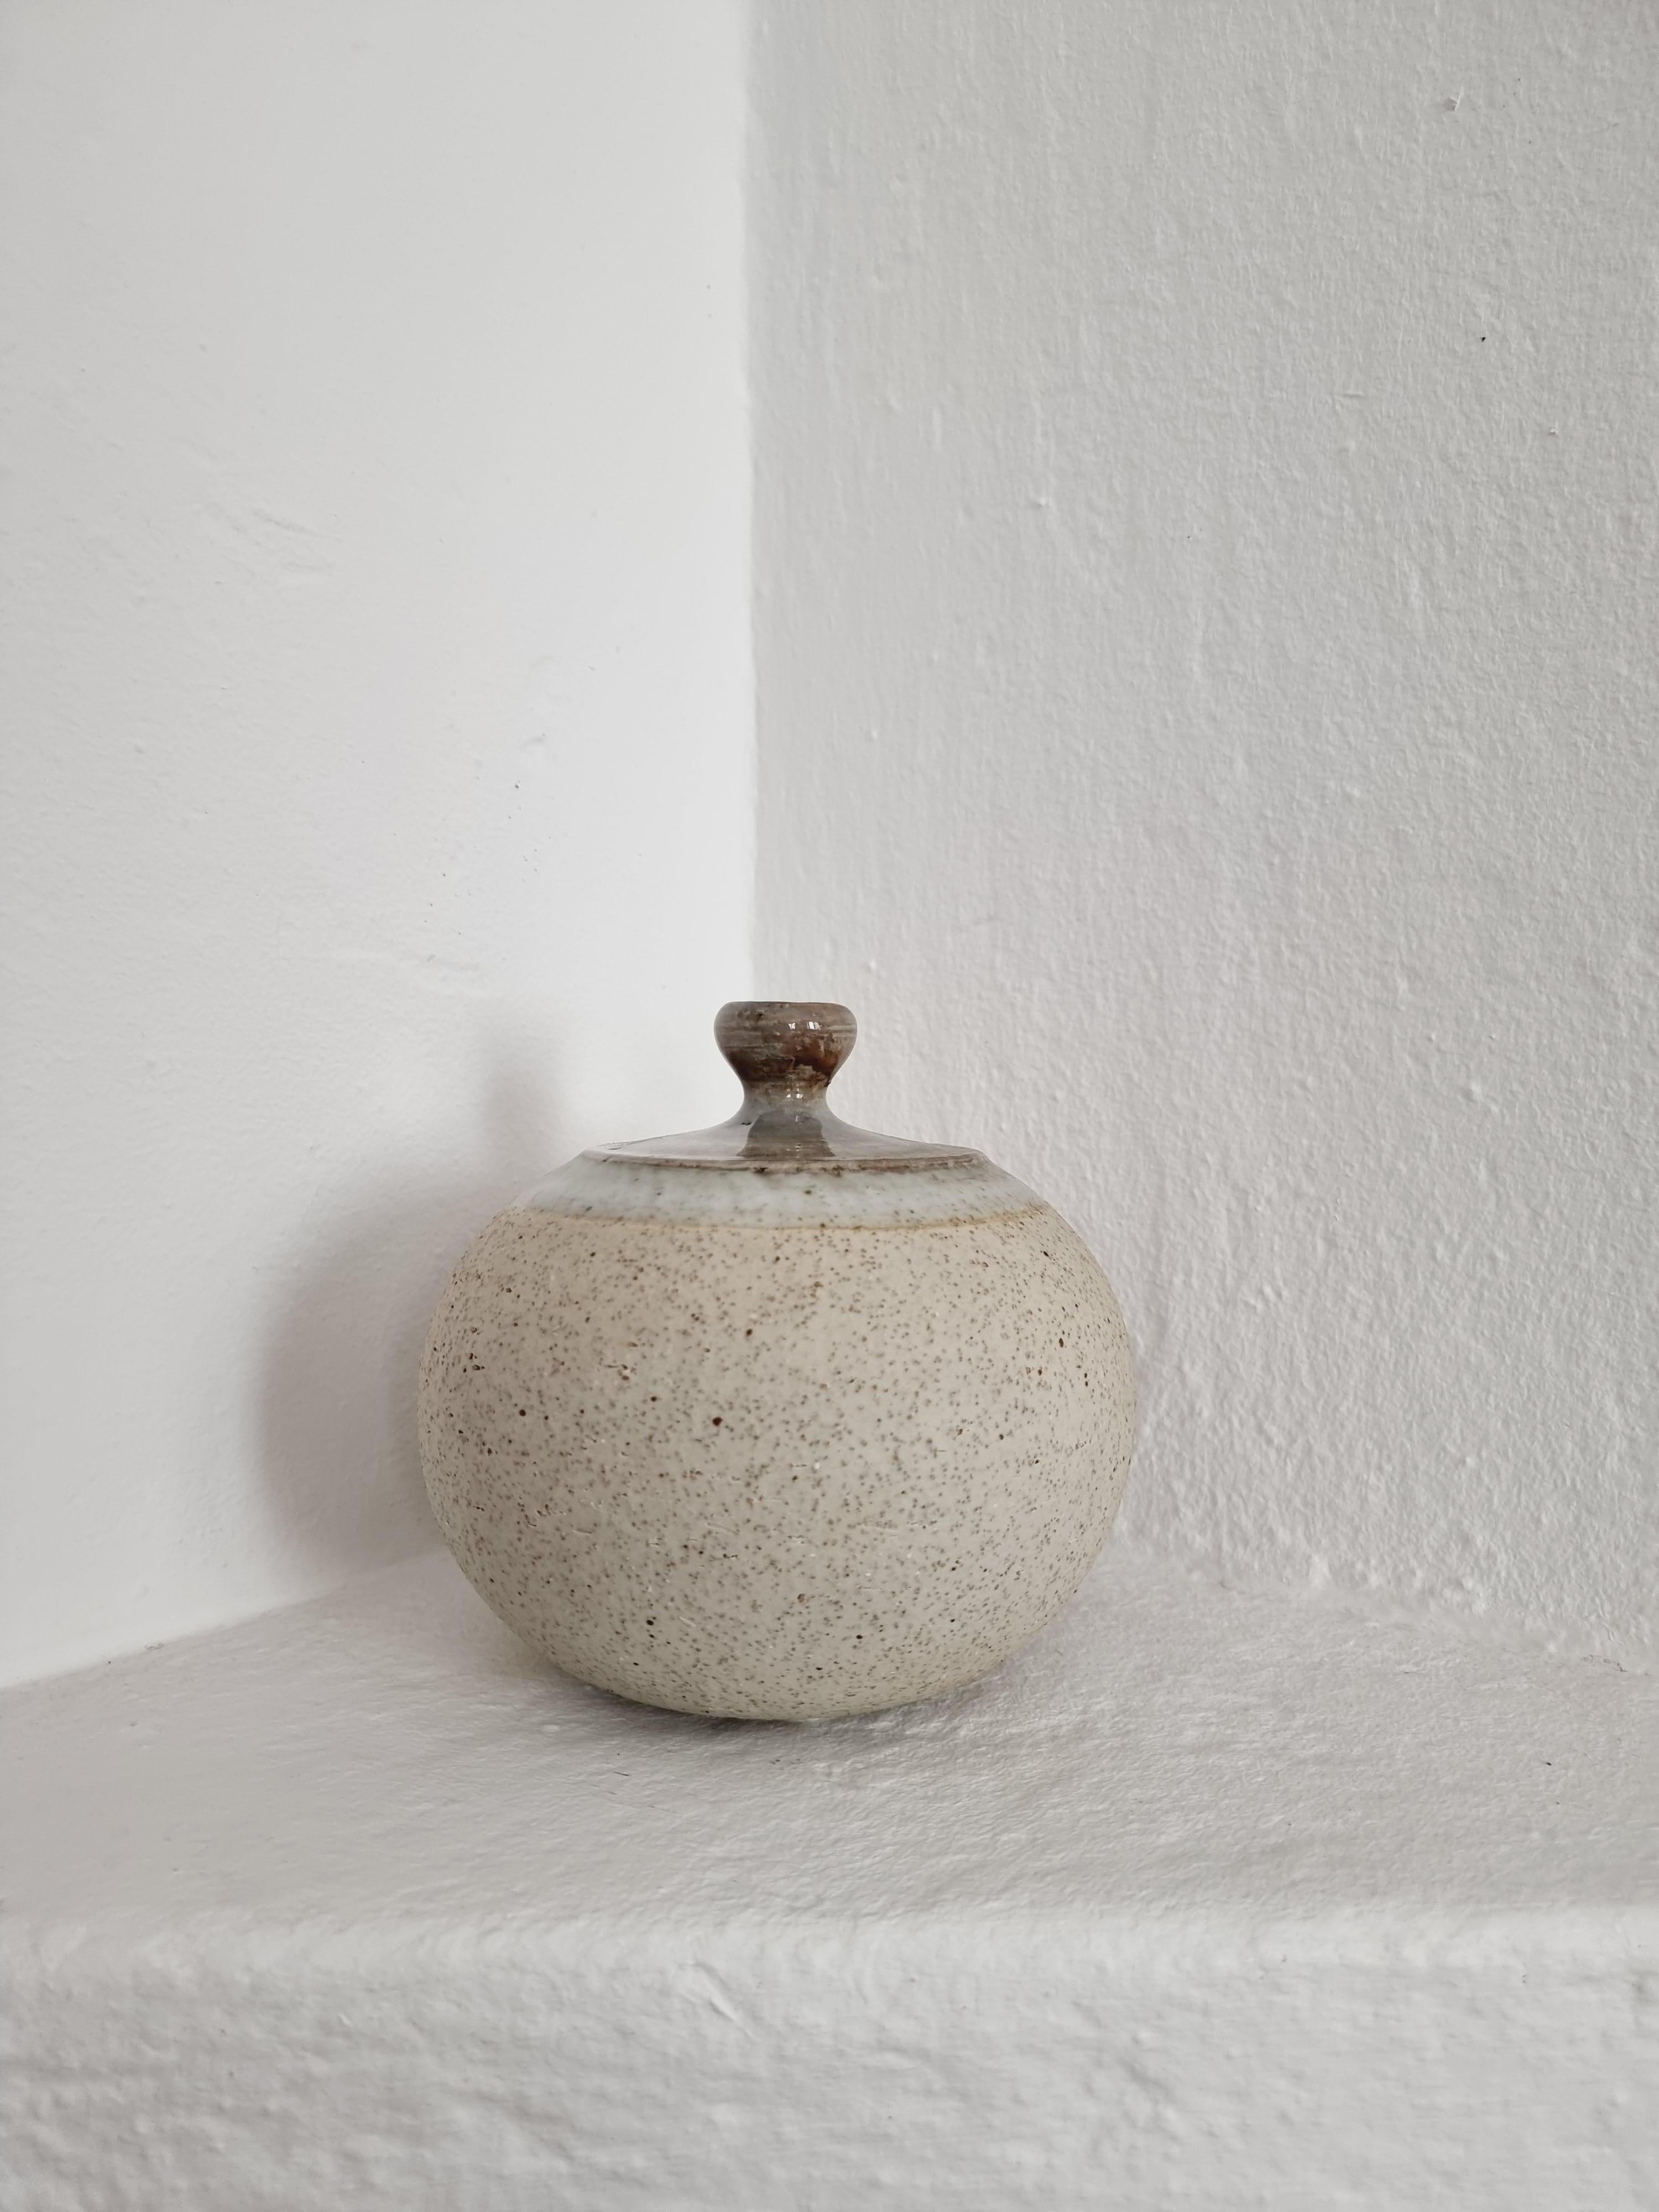 Sylvia Leuchovius (Sweden, 1915-2003), unique vase made for Rörstand, Sweden 1960/70s. 

Partially glazed. Signed. In good condition, very few minimal signs of age and wear. 

Sylvia Leuchovius, one of Sweden’s leading ceramic artists in the